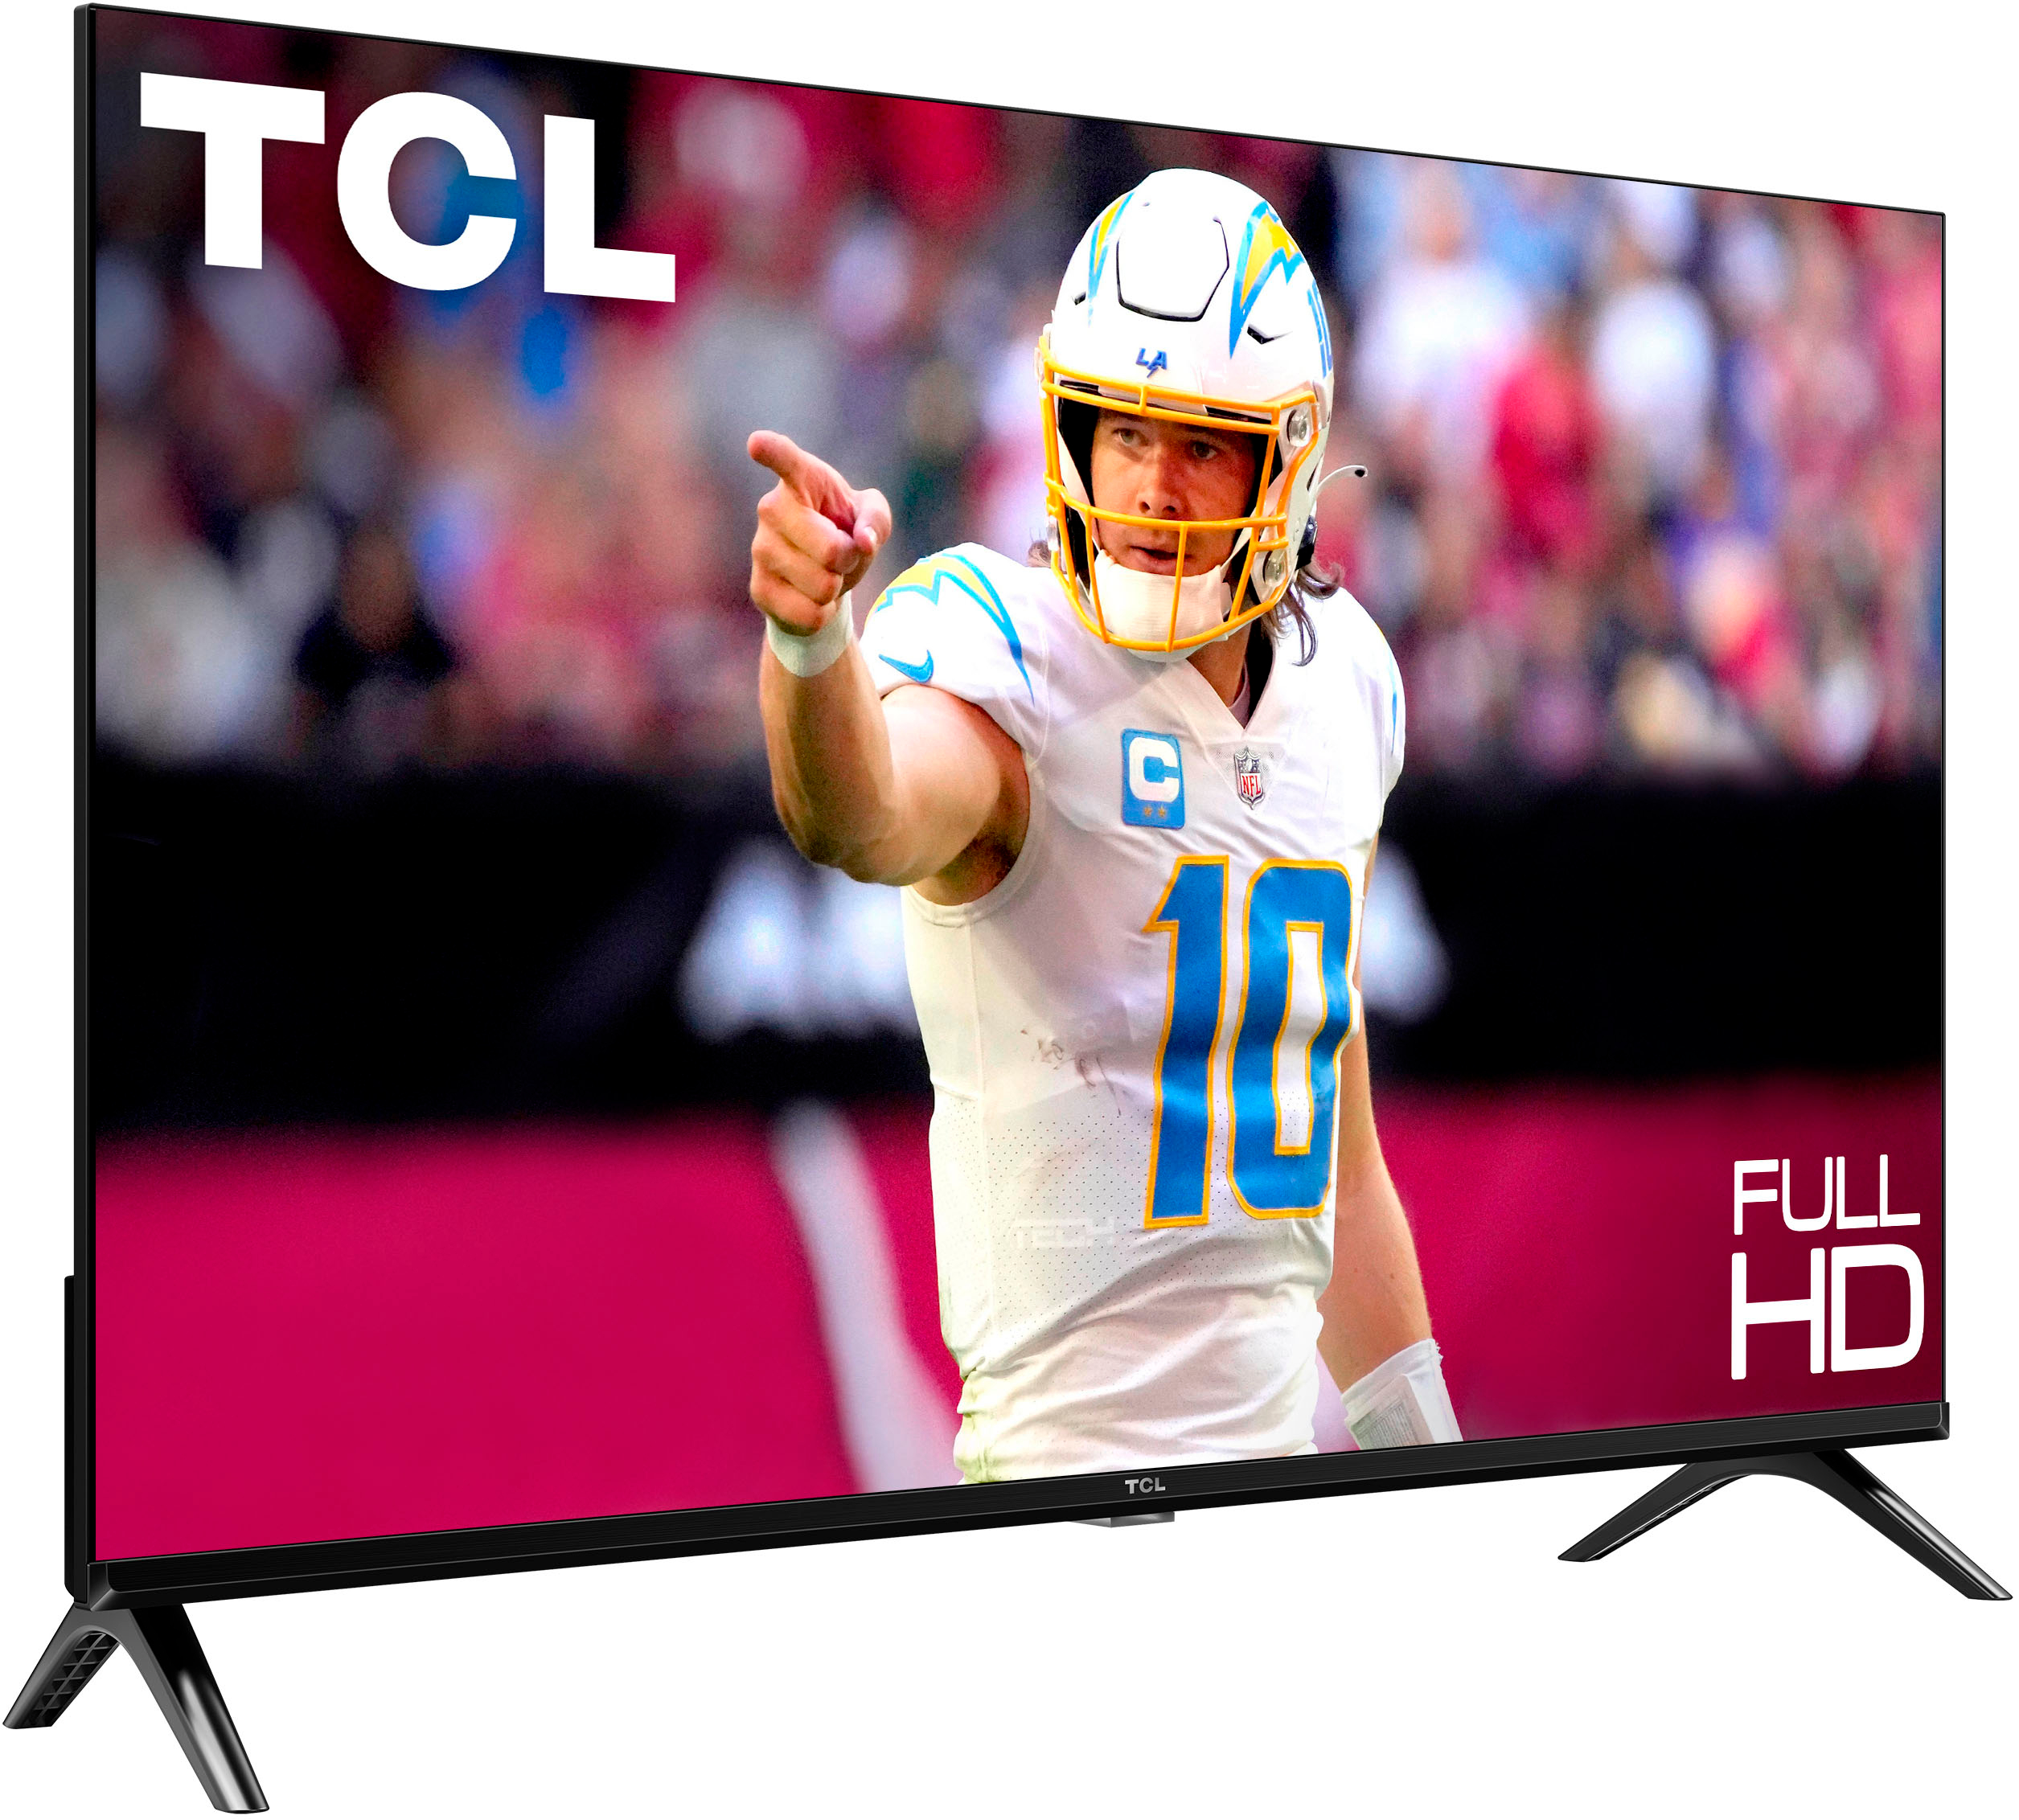 Angle View: TCL - 43" Class S3 S-Class 1080p FHD HDR LED Smart TV with Google TV